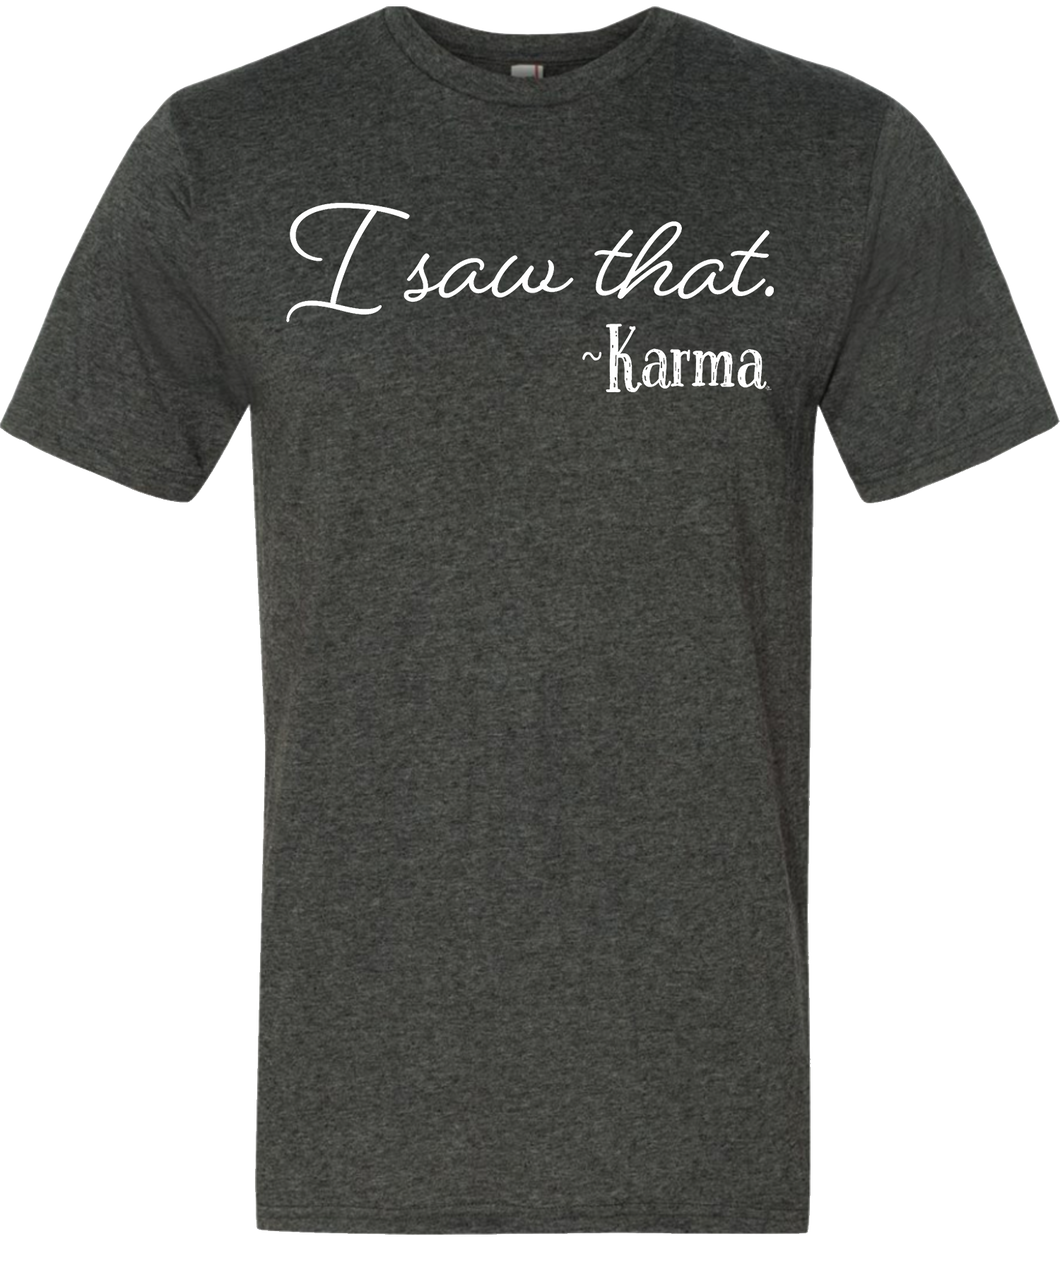 I Saw That ~ Karma Tee (ONLY Size Small, Medium)